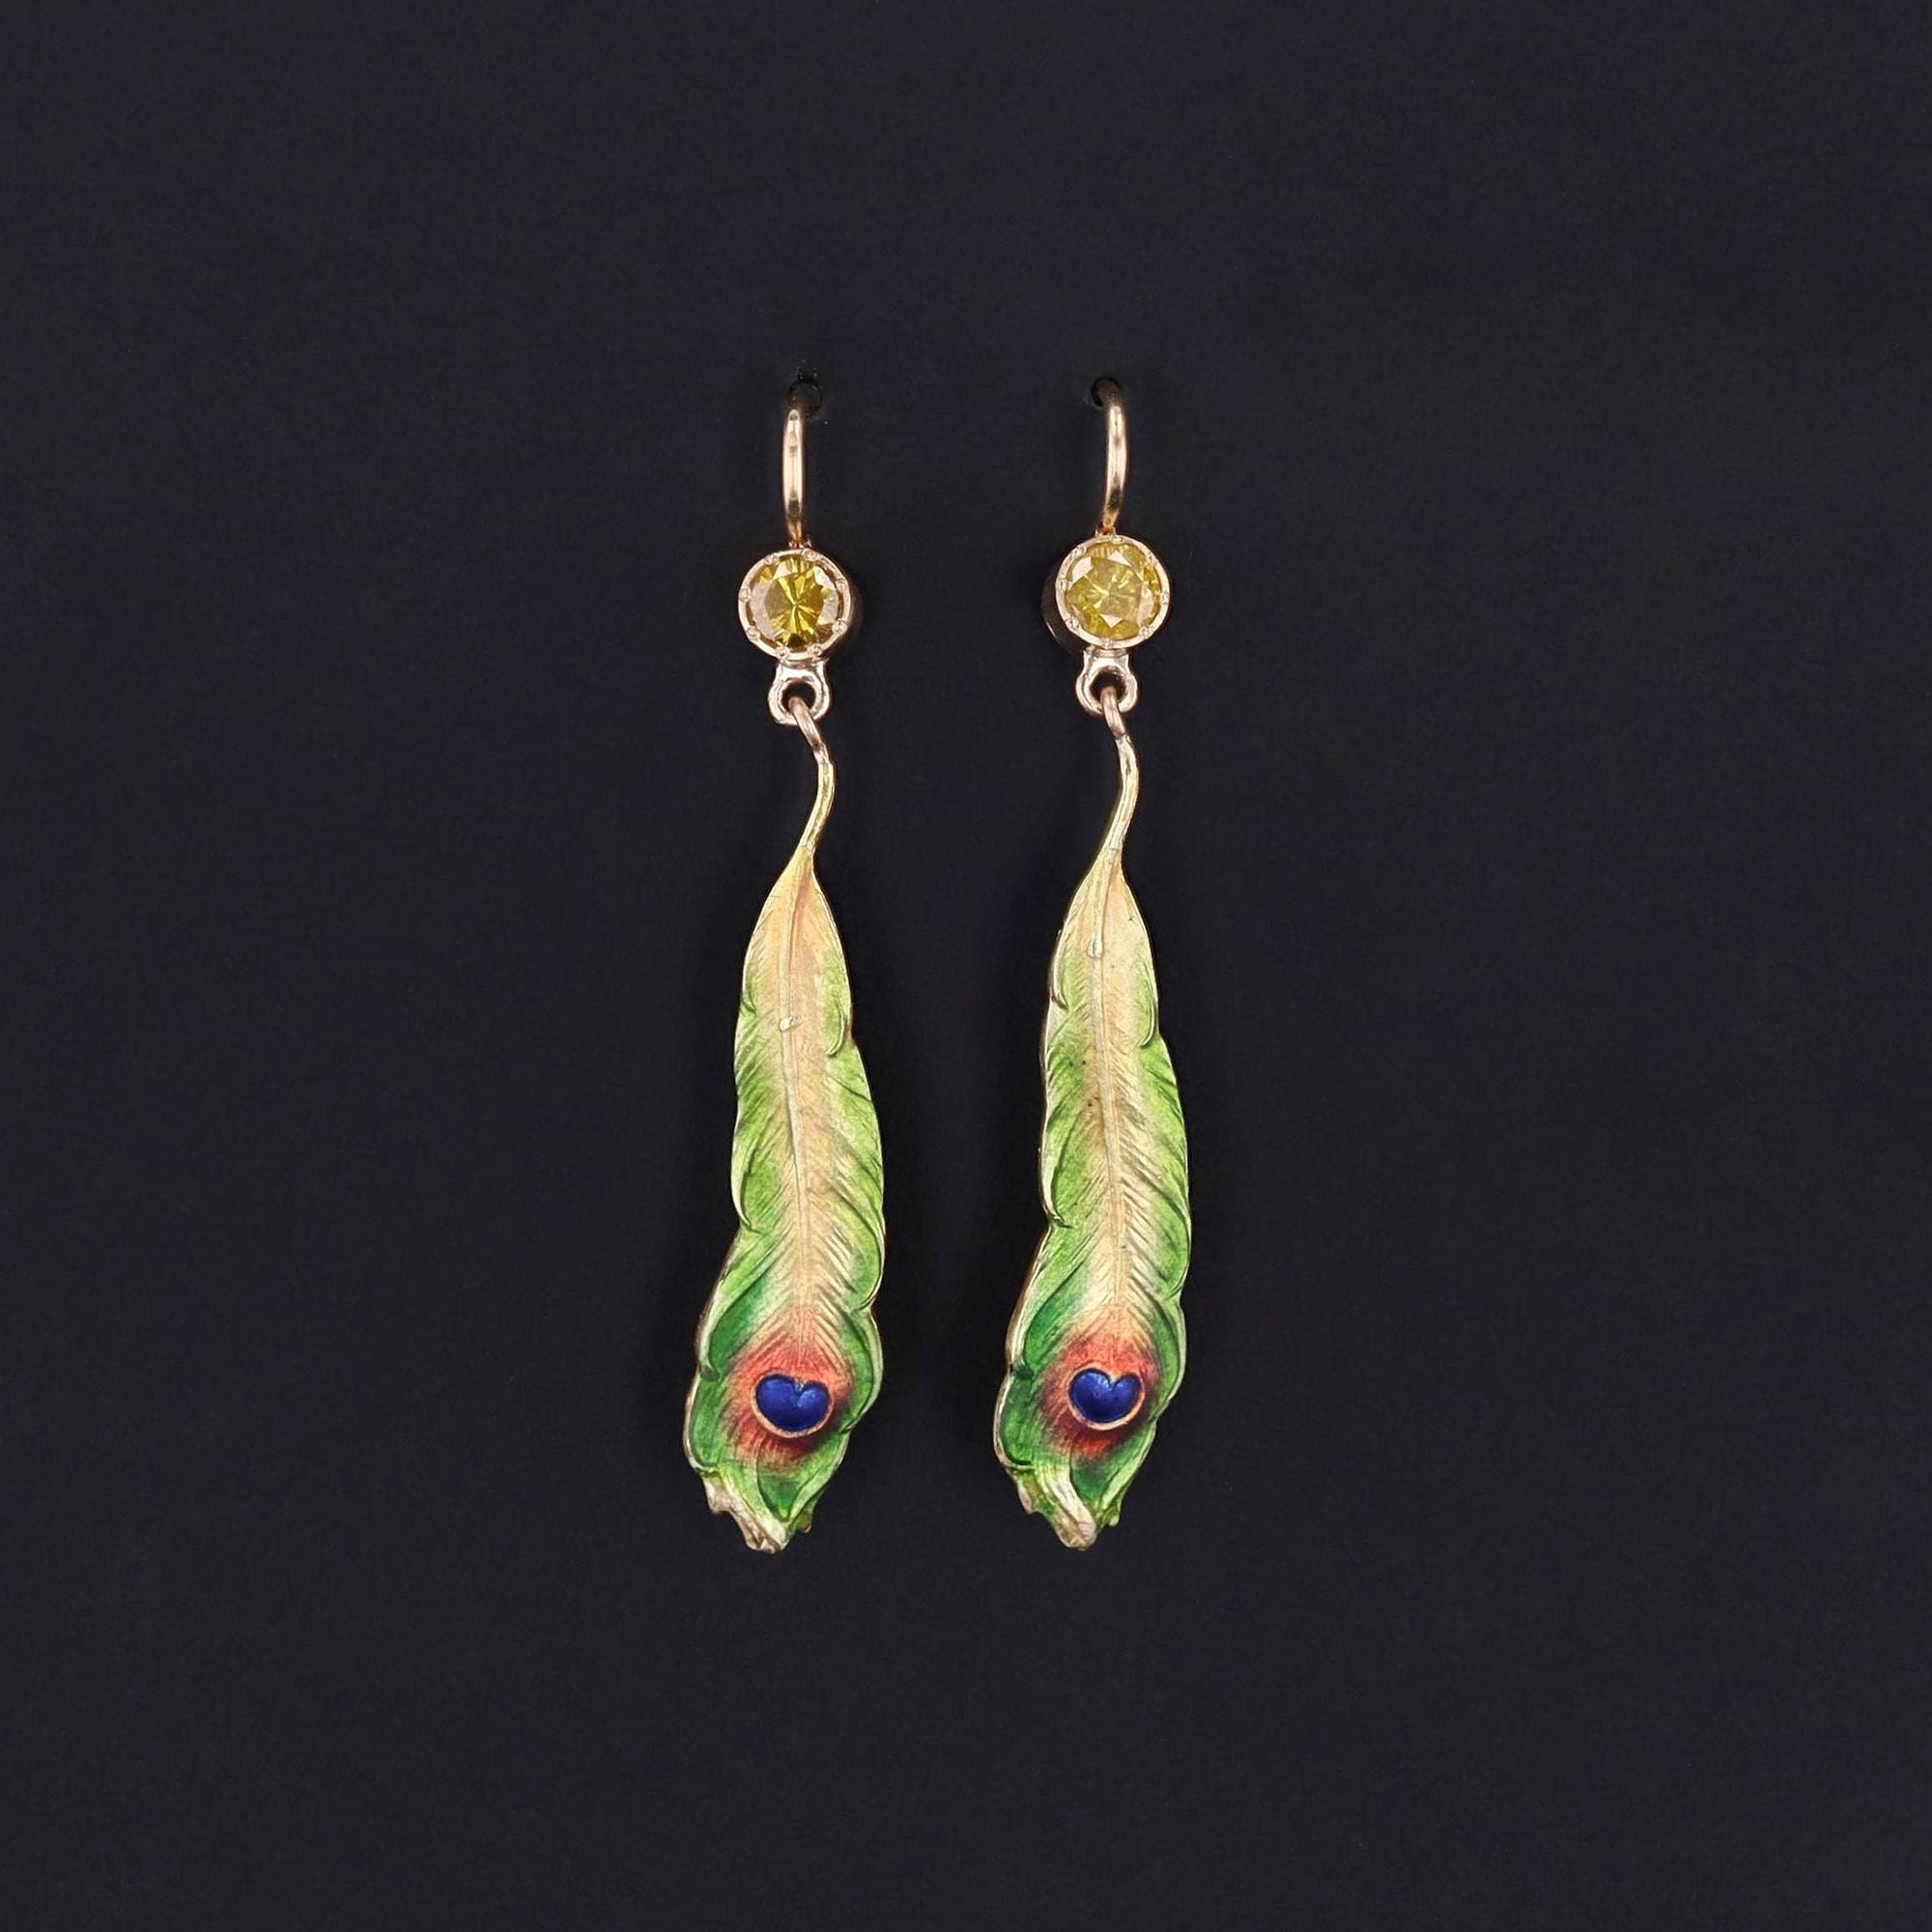 Antique Enamel and Yellow Diamond Peacock Feather Conversion Earrings 14k Gold